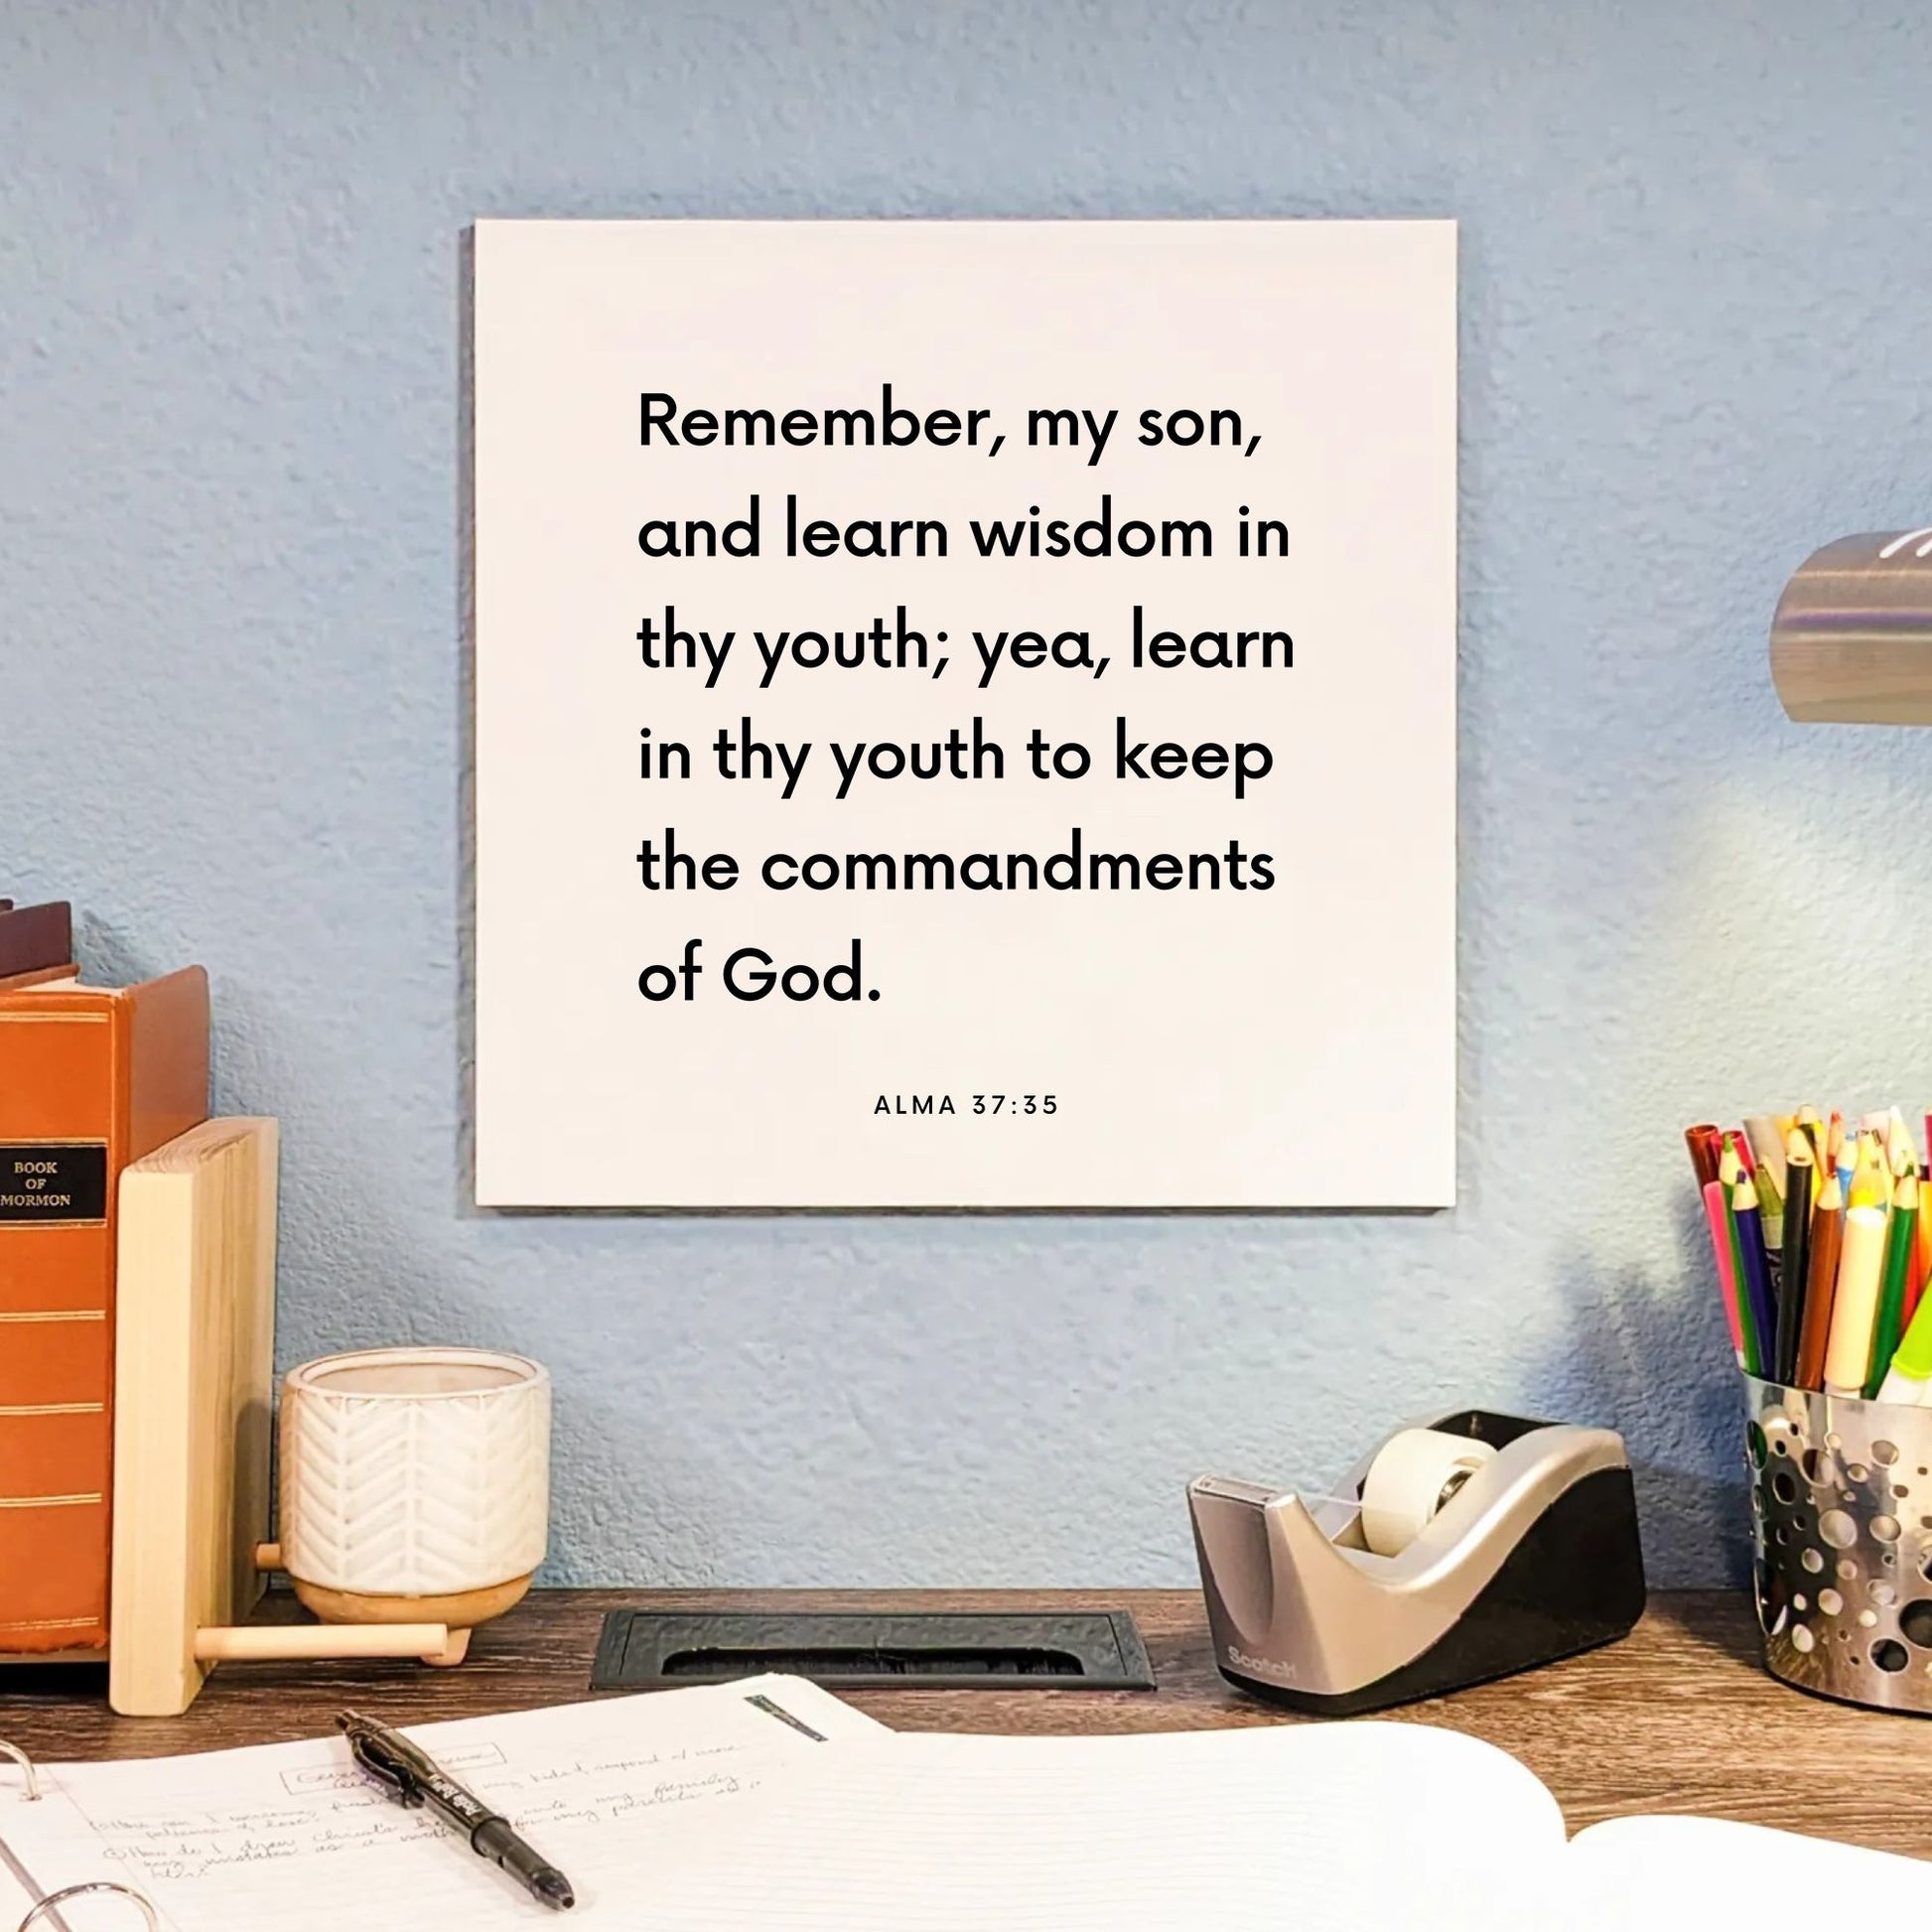 Desk mouting of the scripture tile for Alma 37:35 - "Remember, my son, and learn wisdom in thy youth"